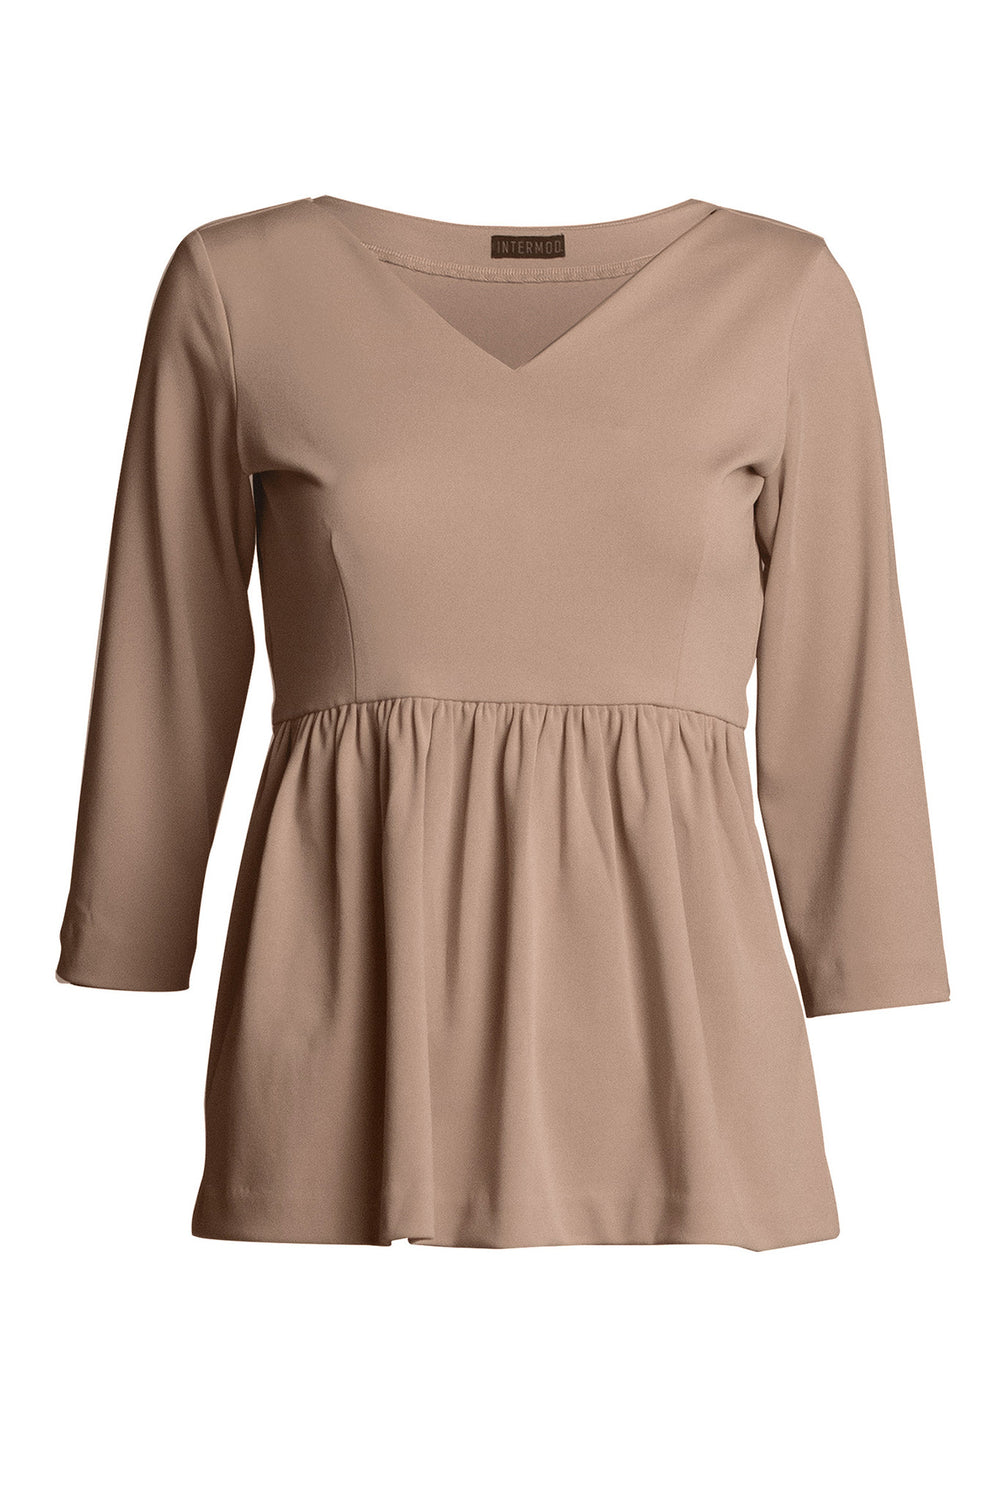 The Fawn Ruched Top